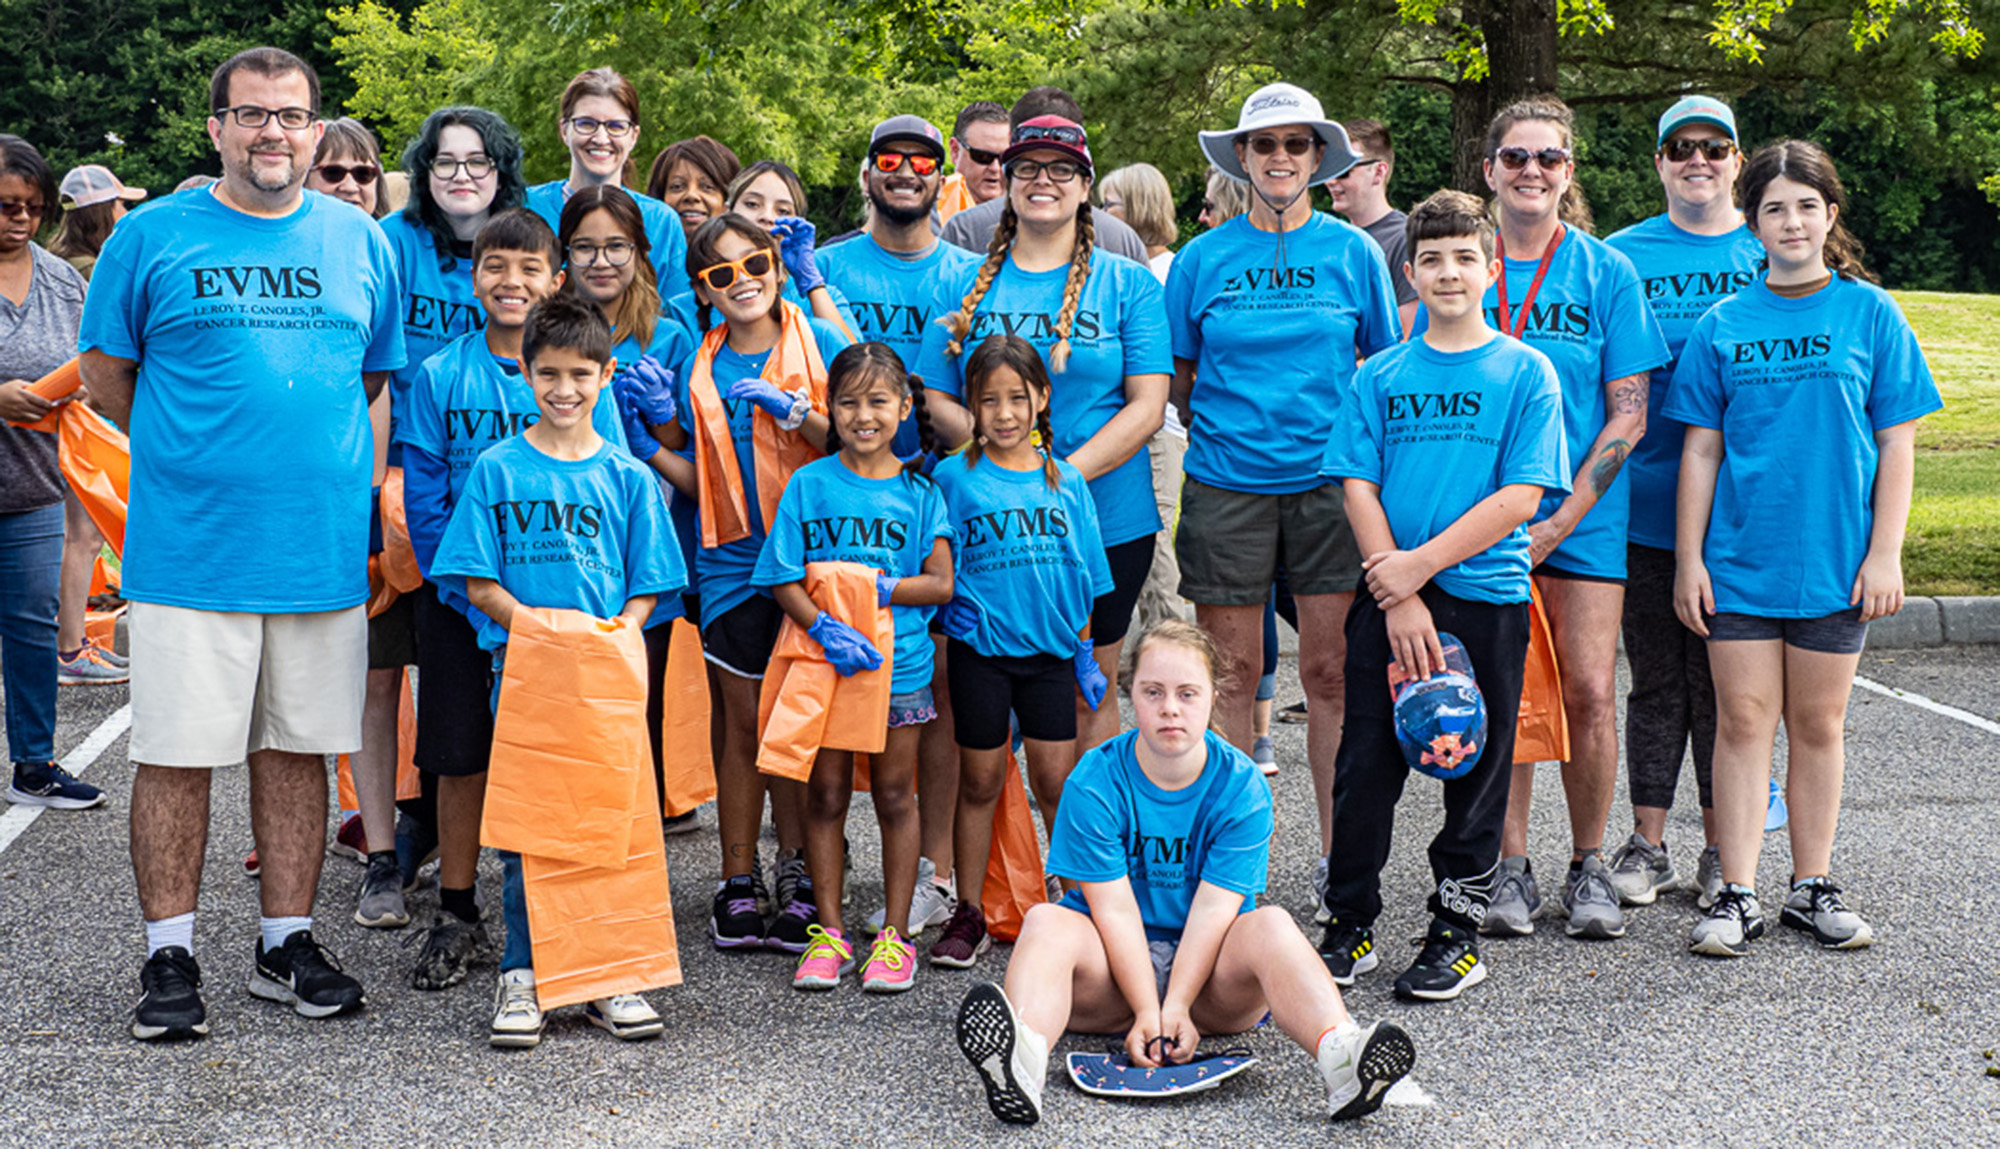 A group of people wearing blue t-shirts pose for photo while holding orange trash bags and other gear to collect trash.